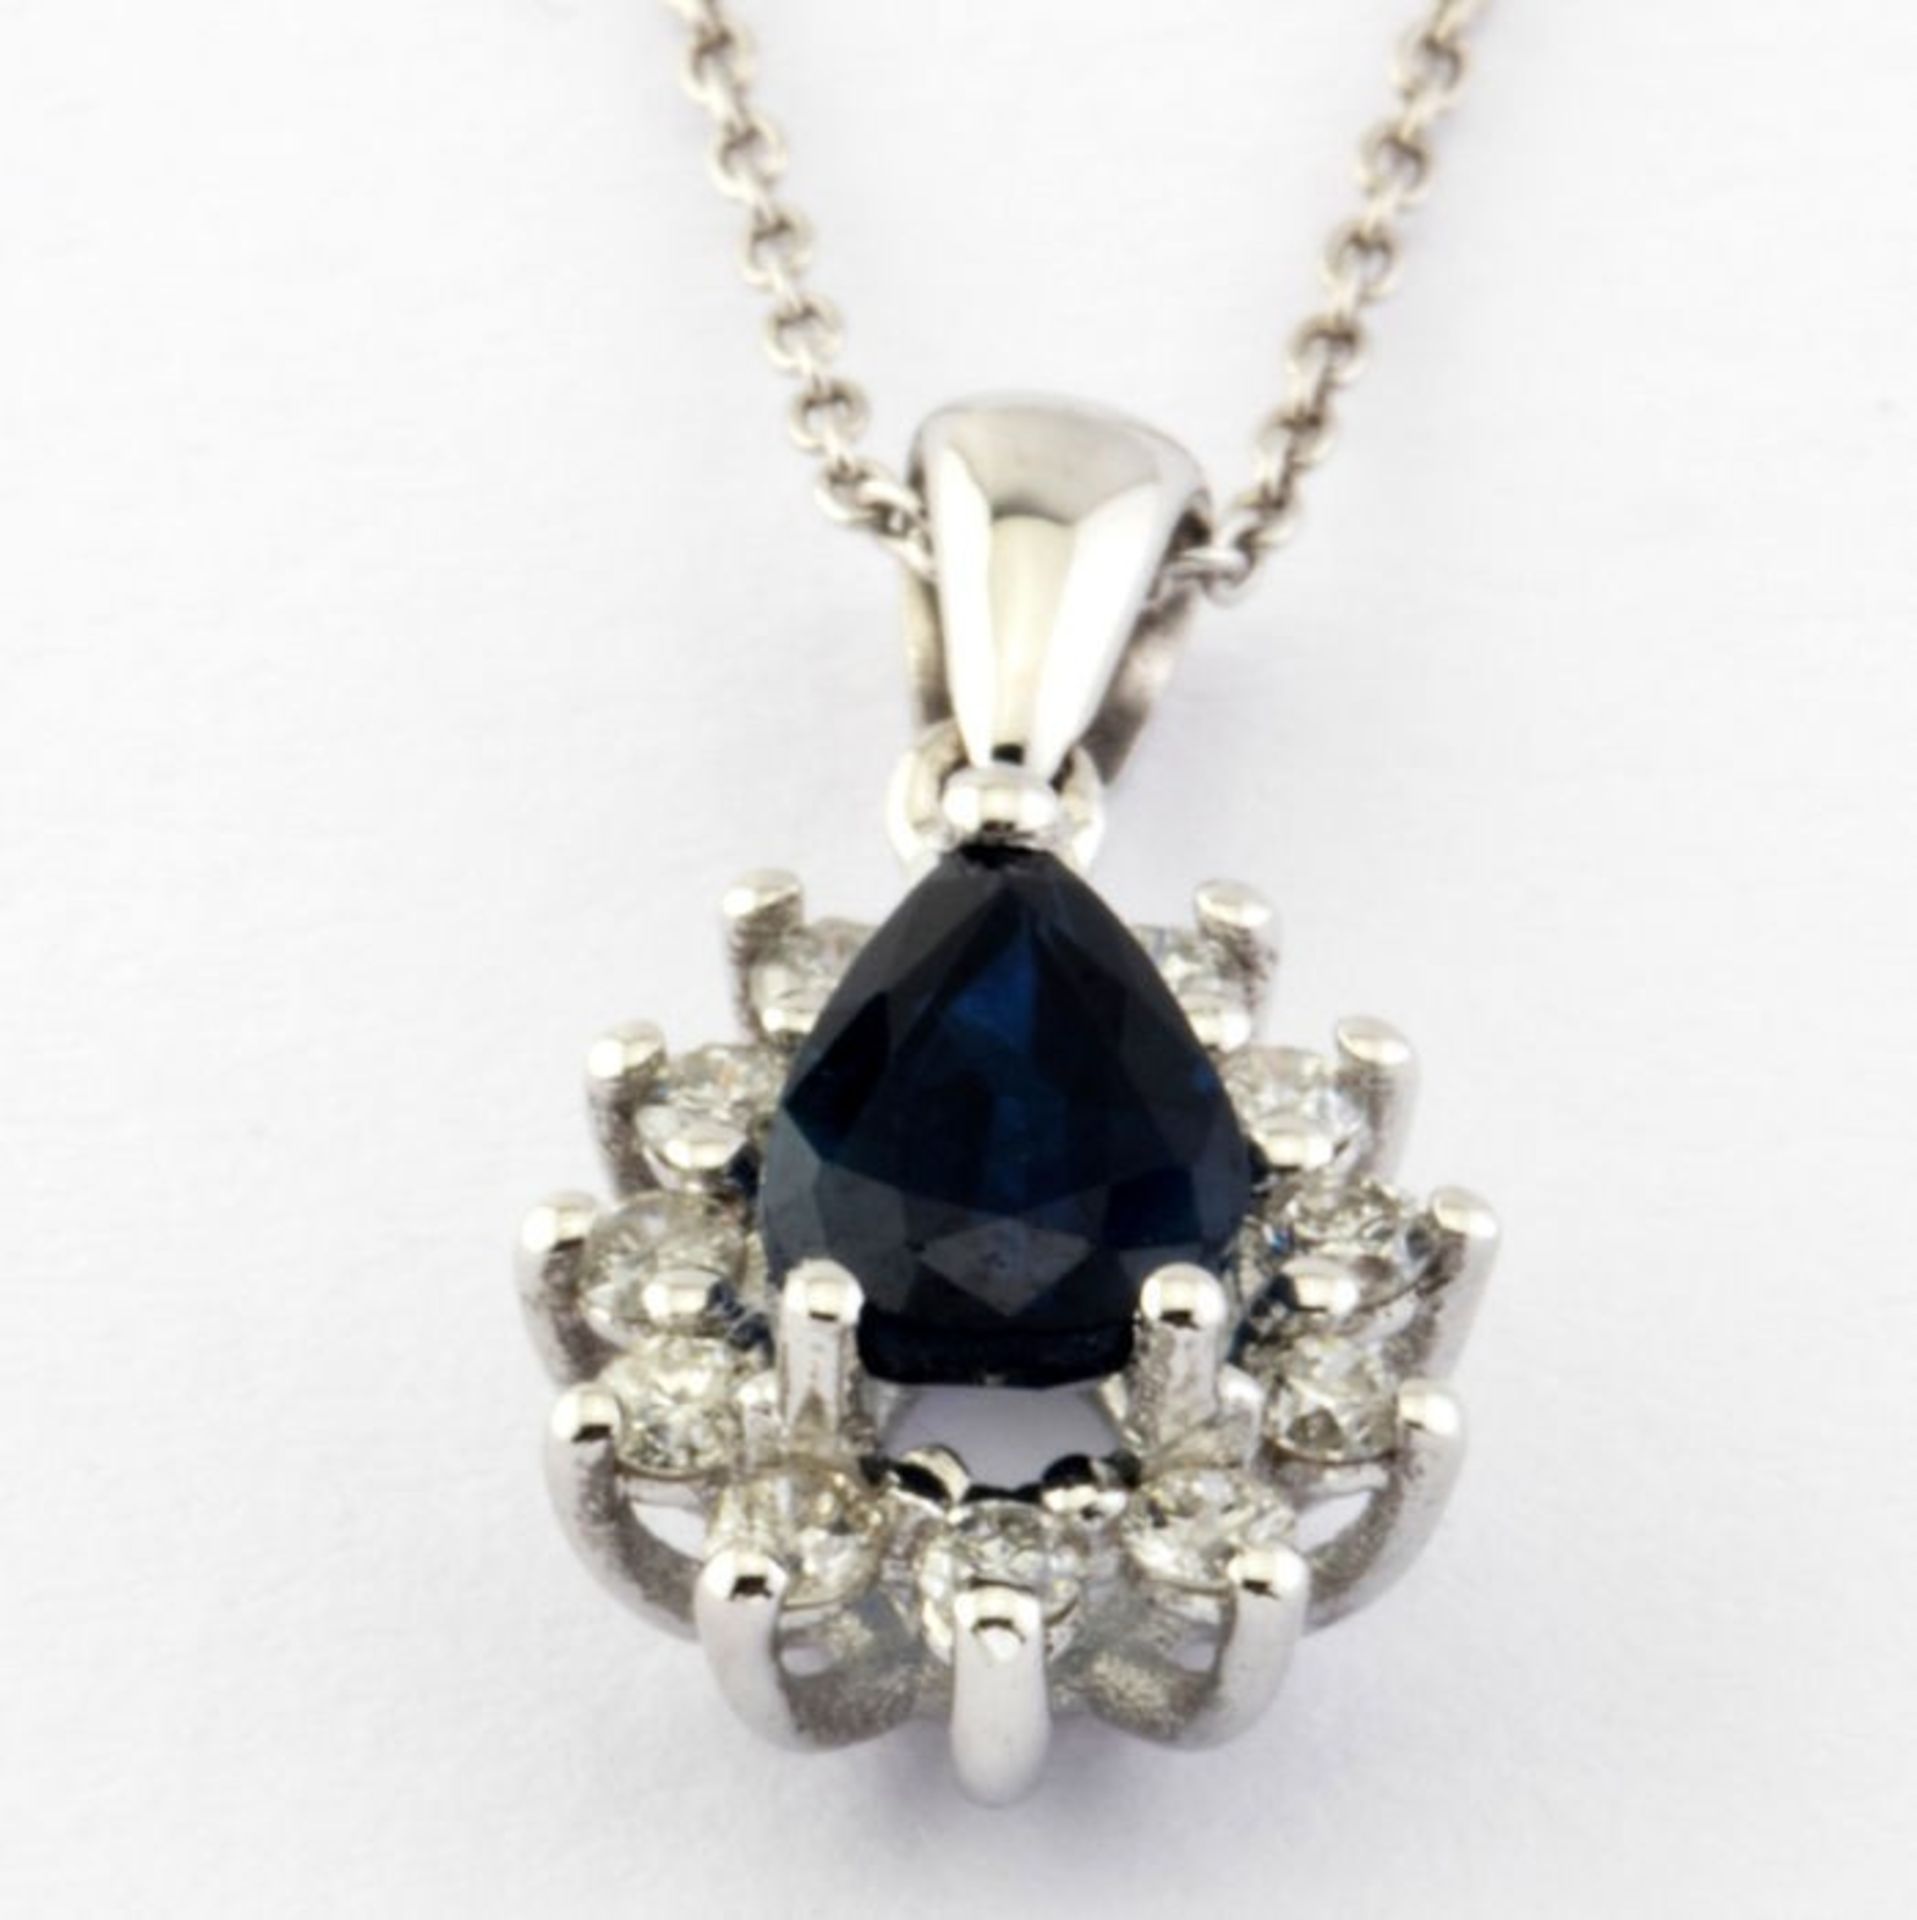 14K White Gold Cluster Pendant Natural Sapphire and Diamond - Image 2 of 6